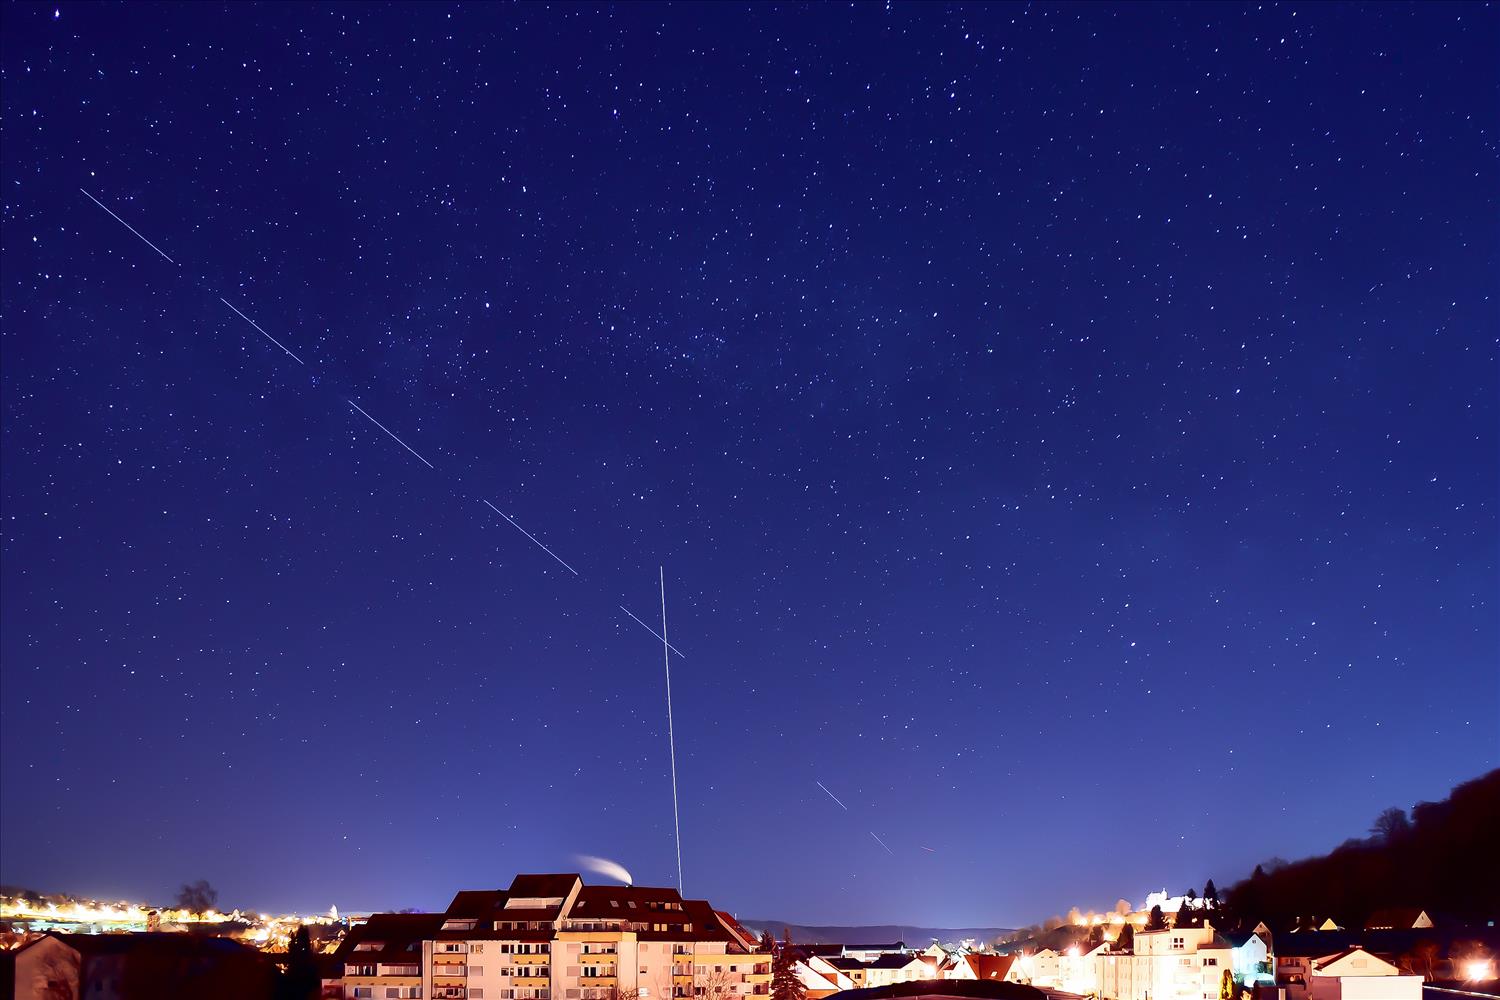 Soon, 1 out of every 15 points of light in the sky will be a satellite